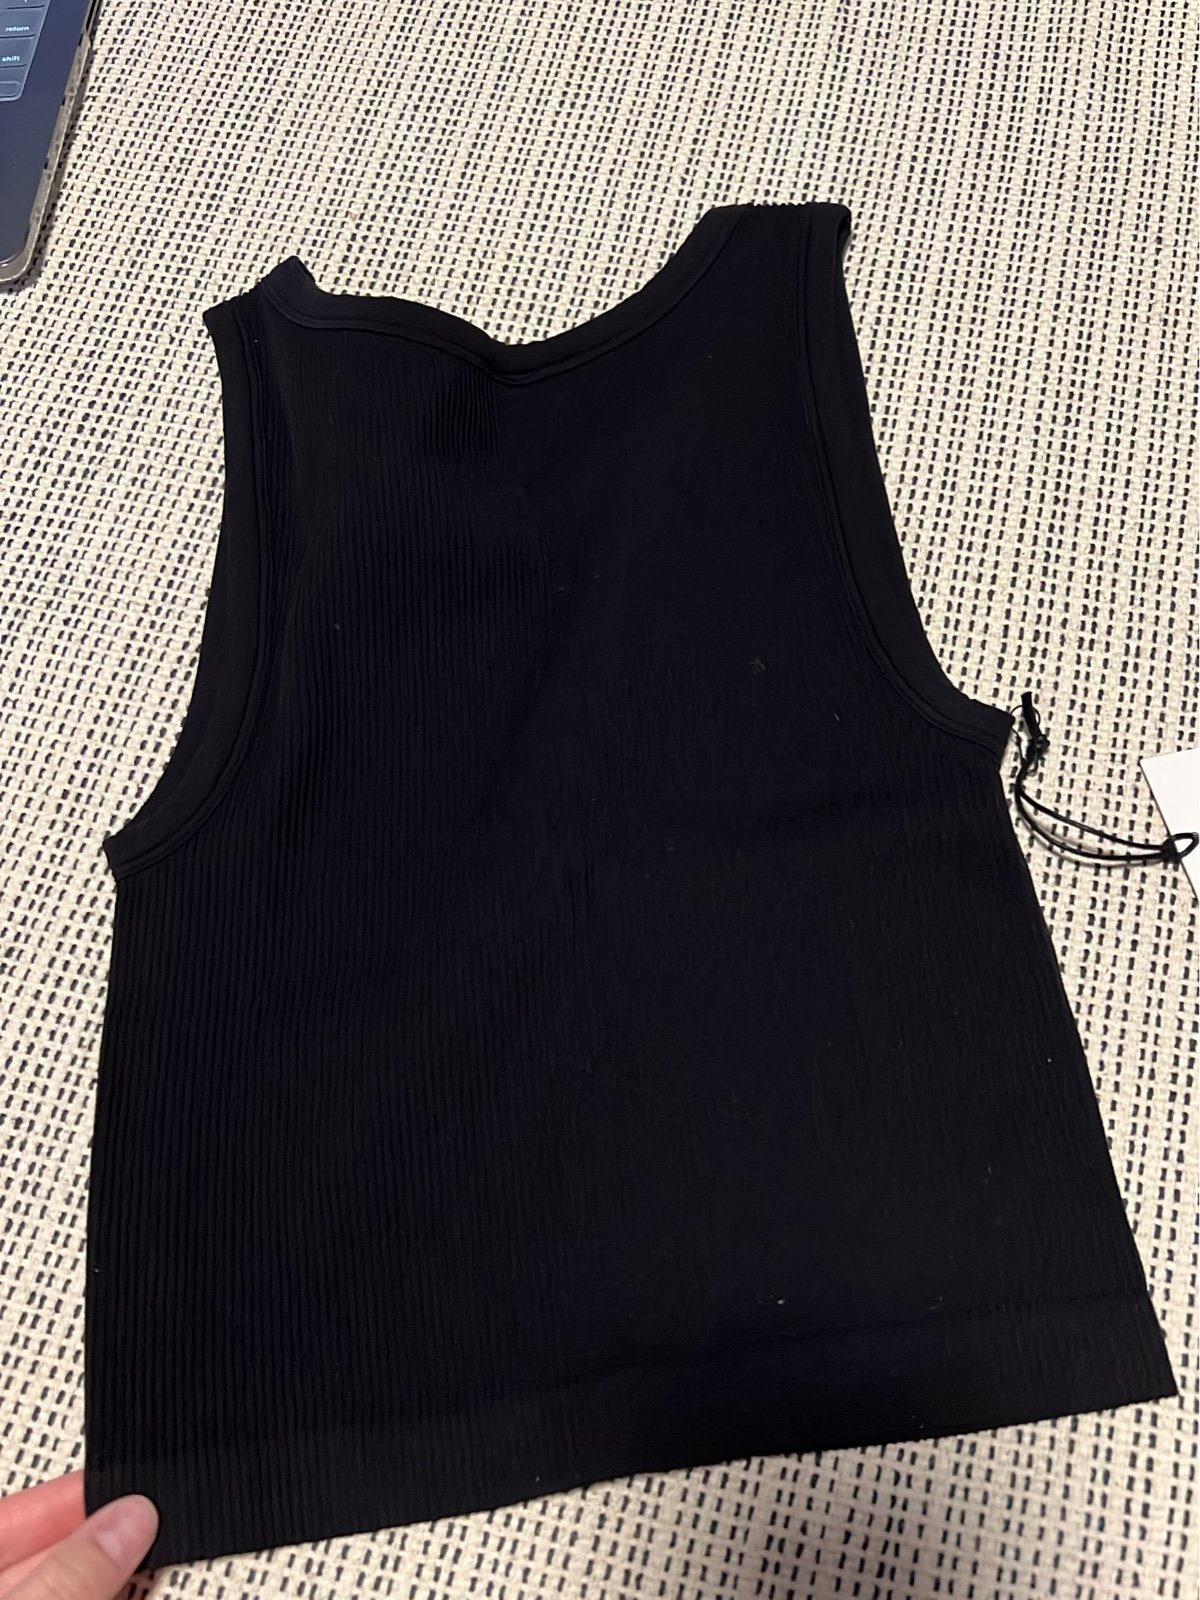 Exclusive Aritzia Black Sinched Seamless Tank Top PK9vNsHhv Factory Price